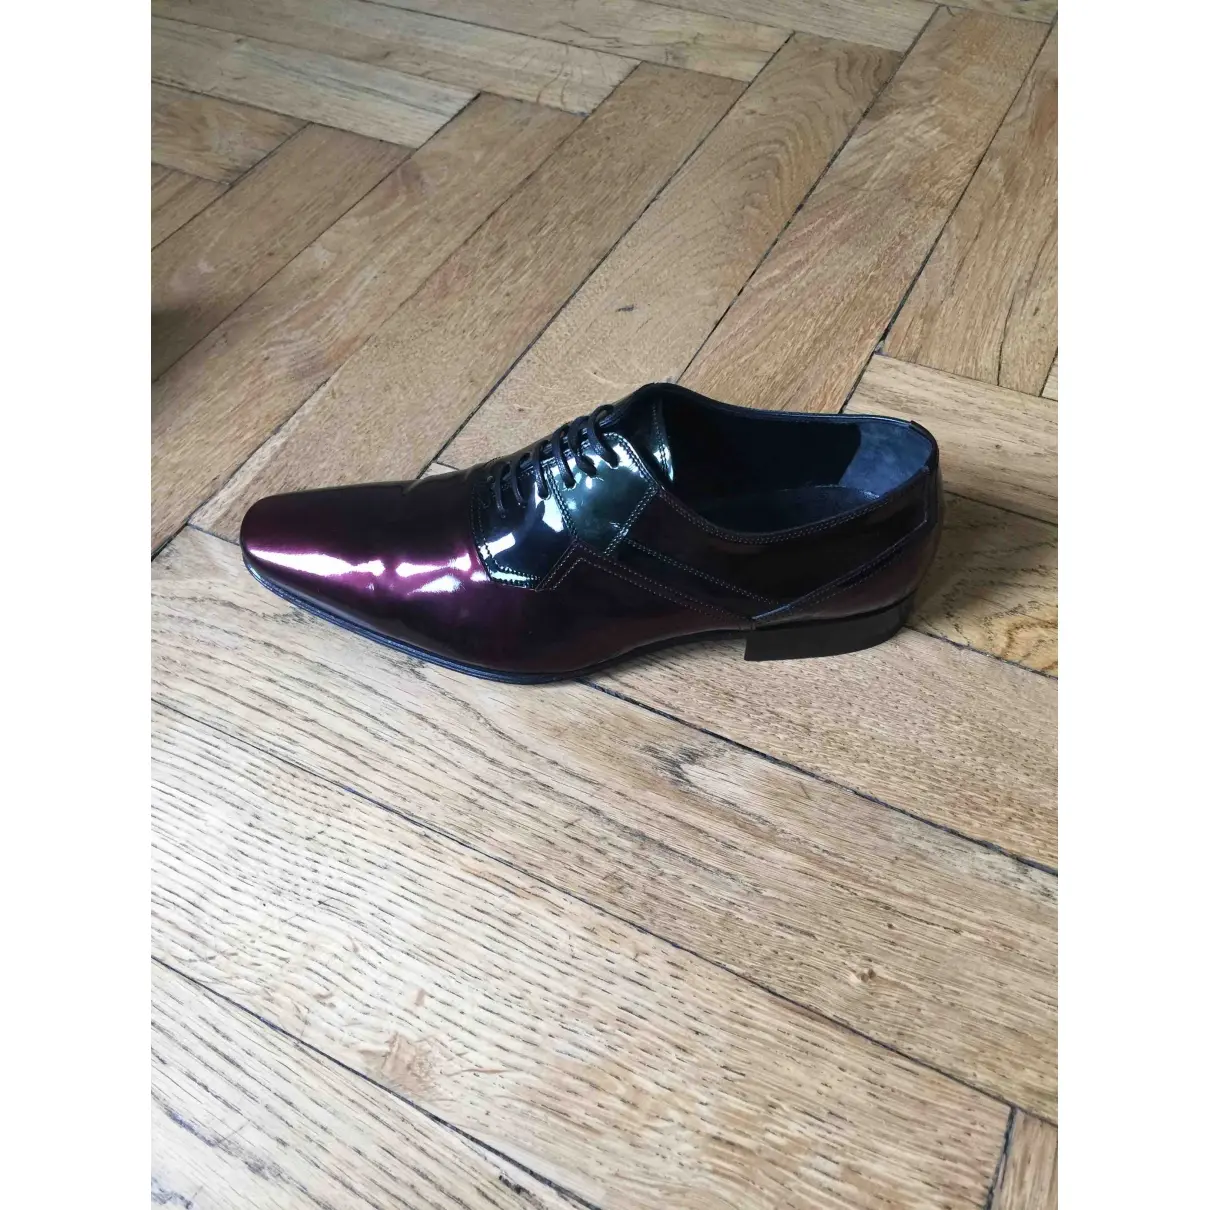 Dior Homme Patent leather lace ups for sale